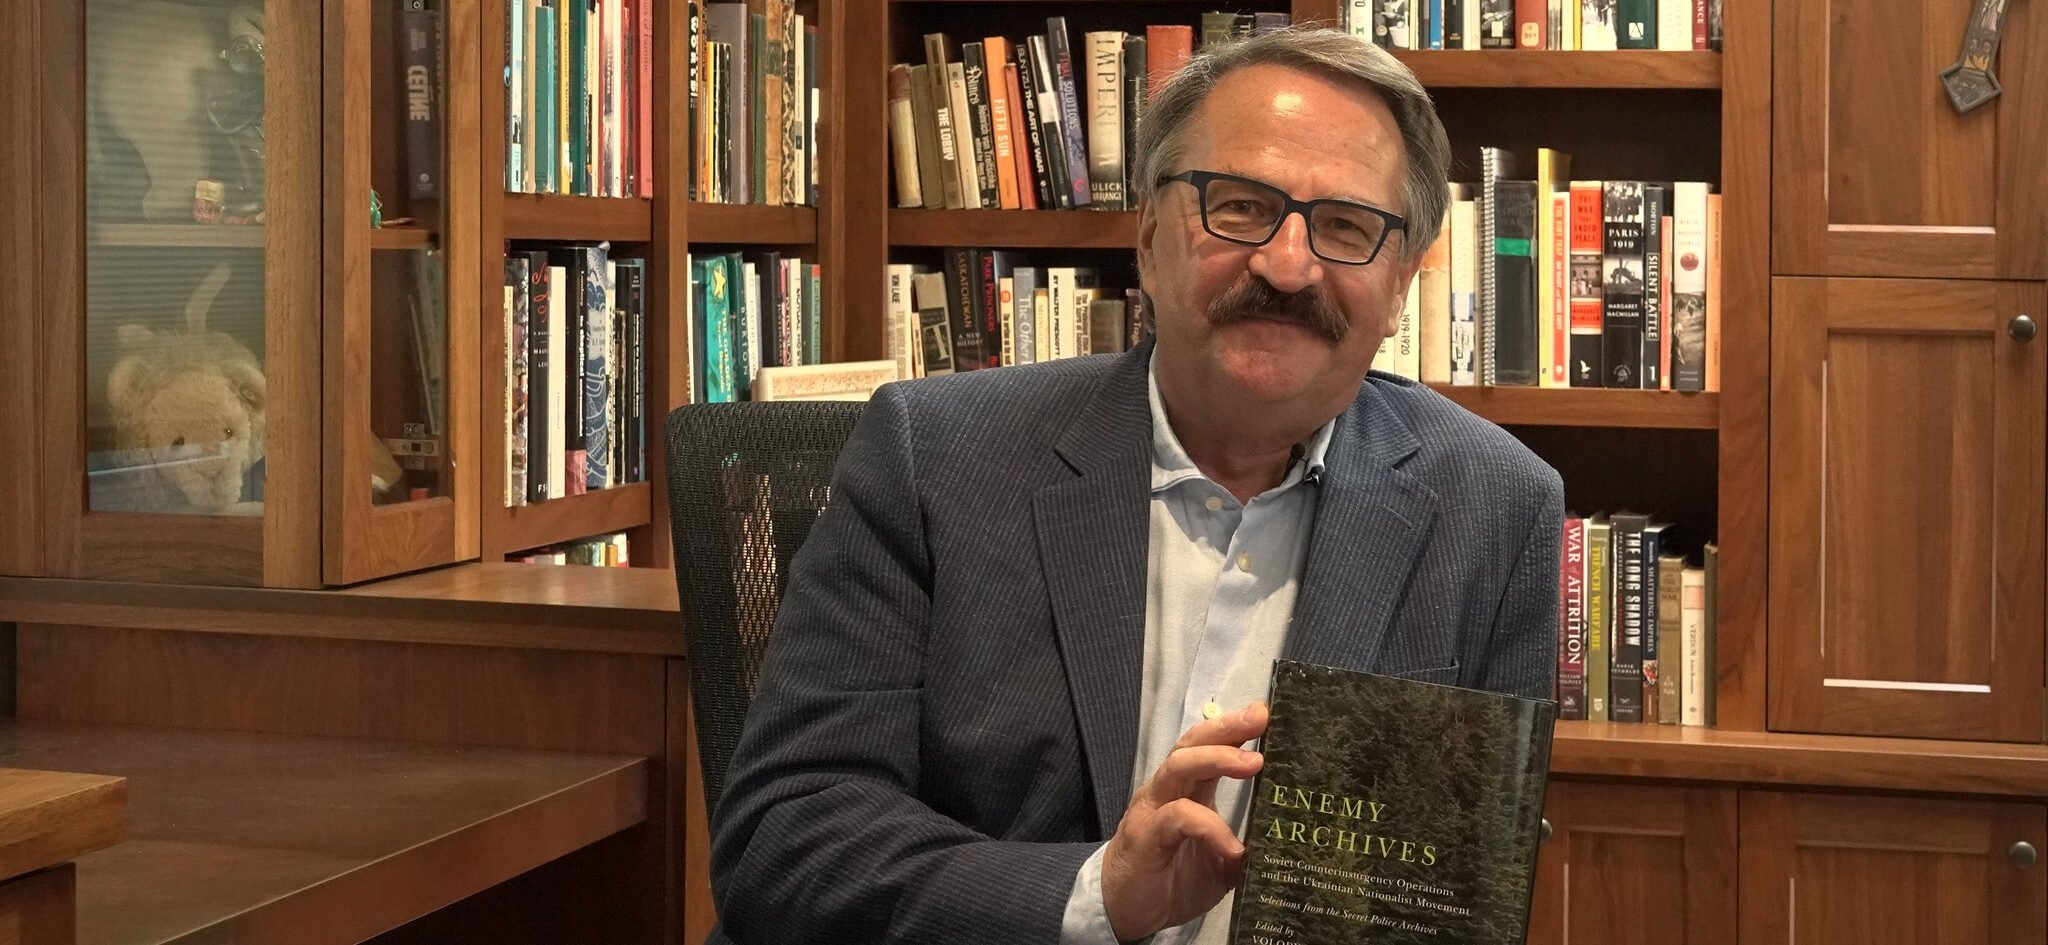 Professor Luciuk’s book acknowledged as ‘best historical material’ in US